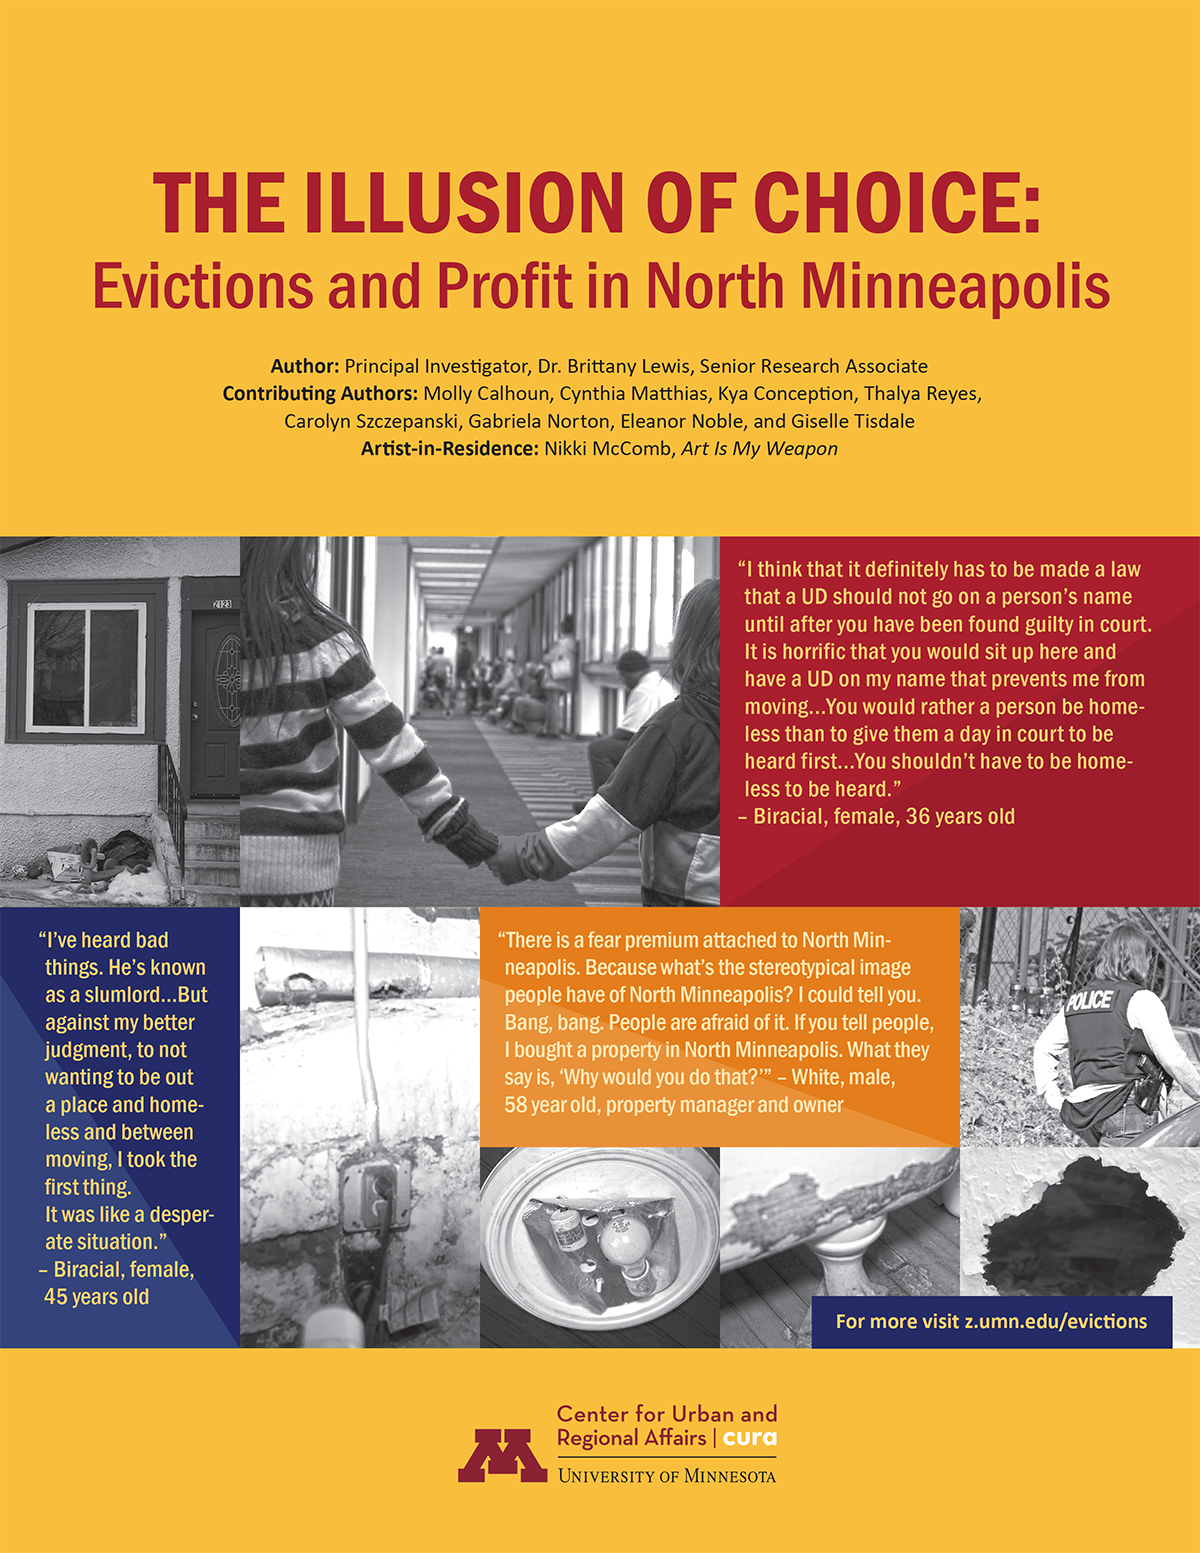 "The Illusion of Choice: Evictions and Profit in North Minneapolis"